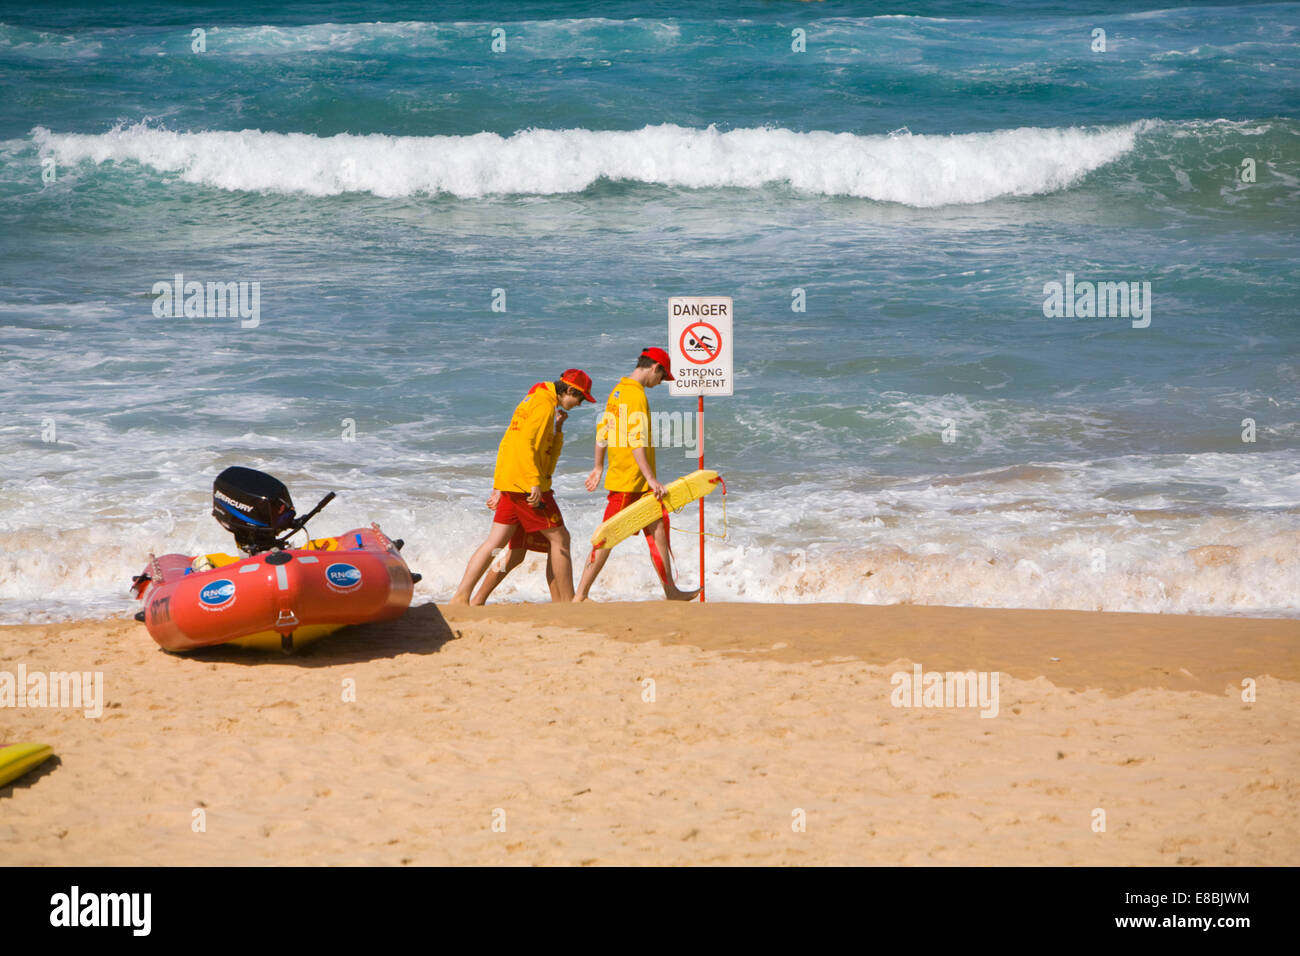 two surf rescue life savers teenage boys on manly beach,sydney,australia walking past danger strong currents sign Stock Photo